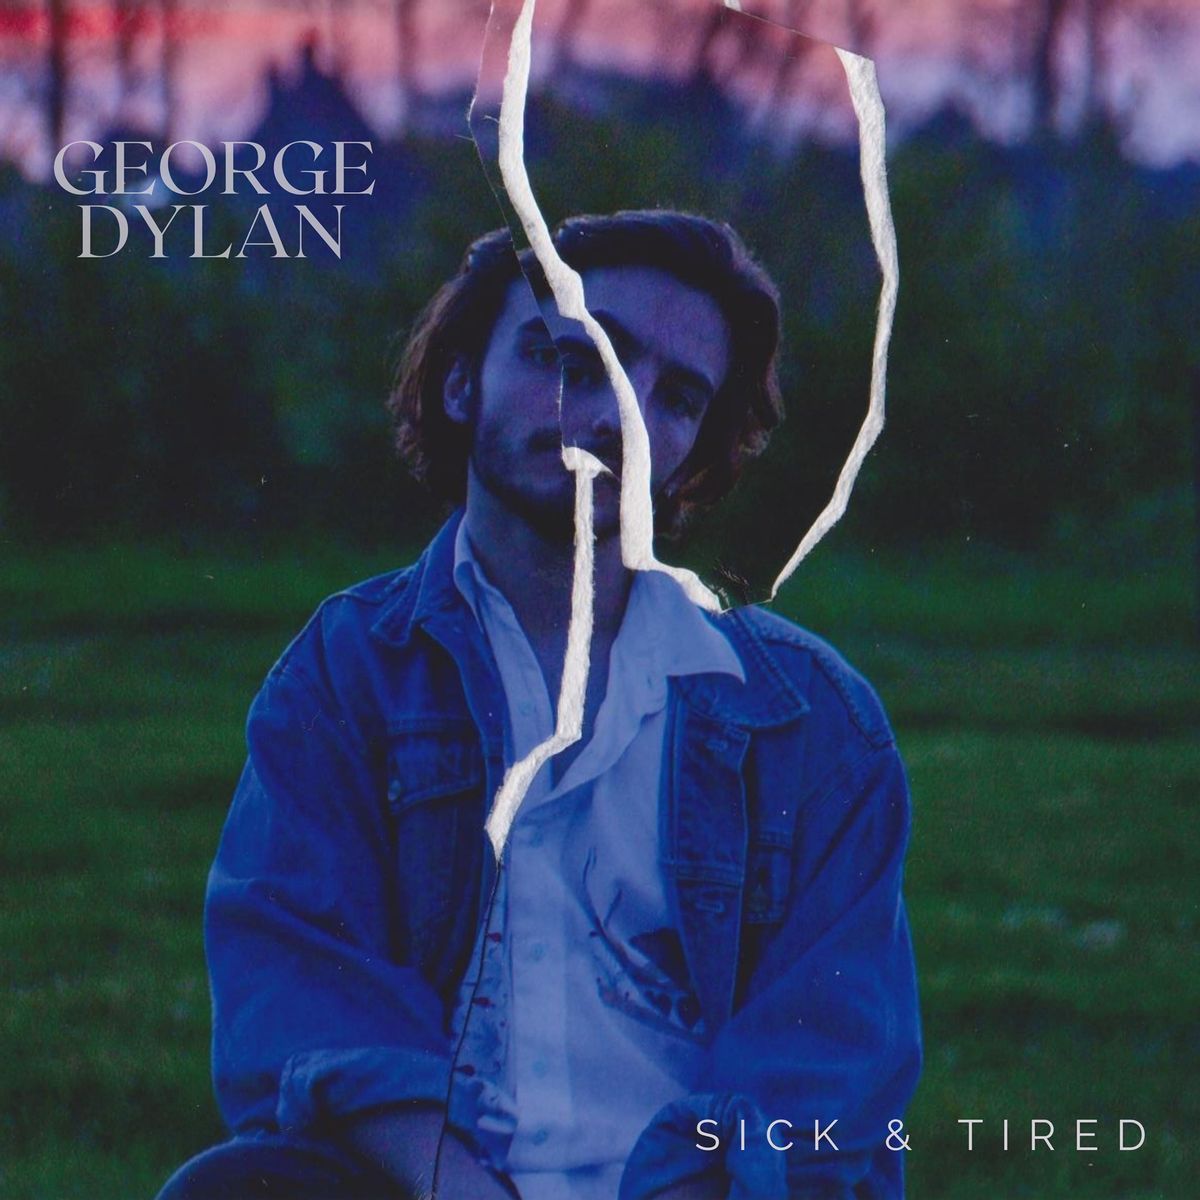 George Dylan - Sick & Tired